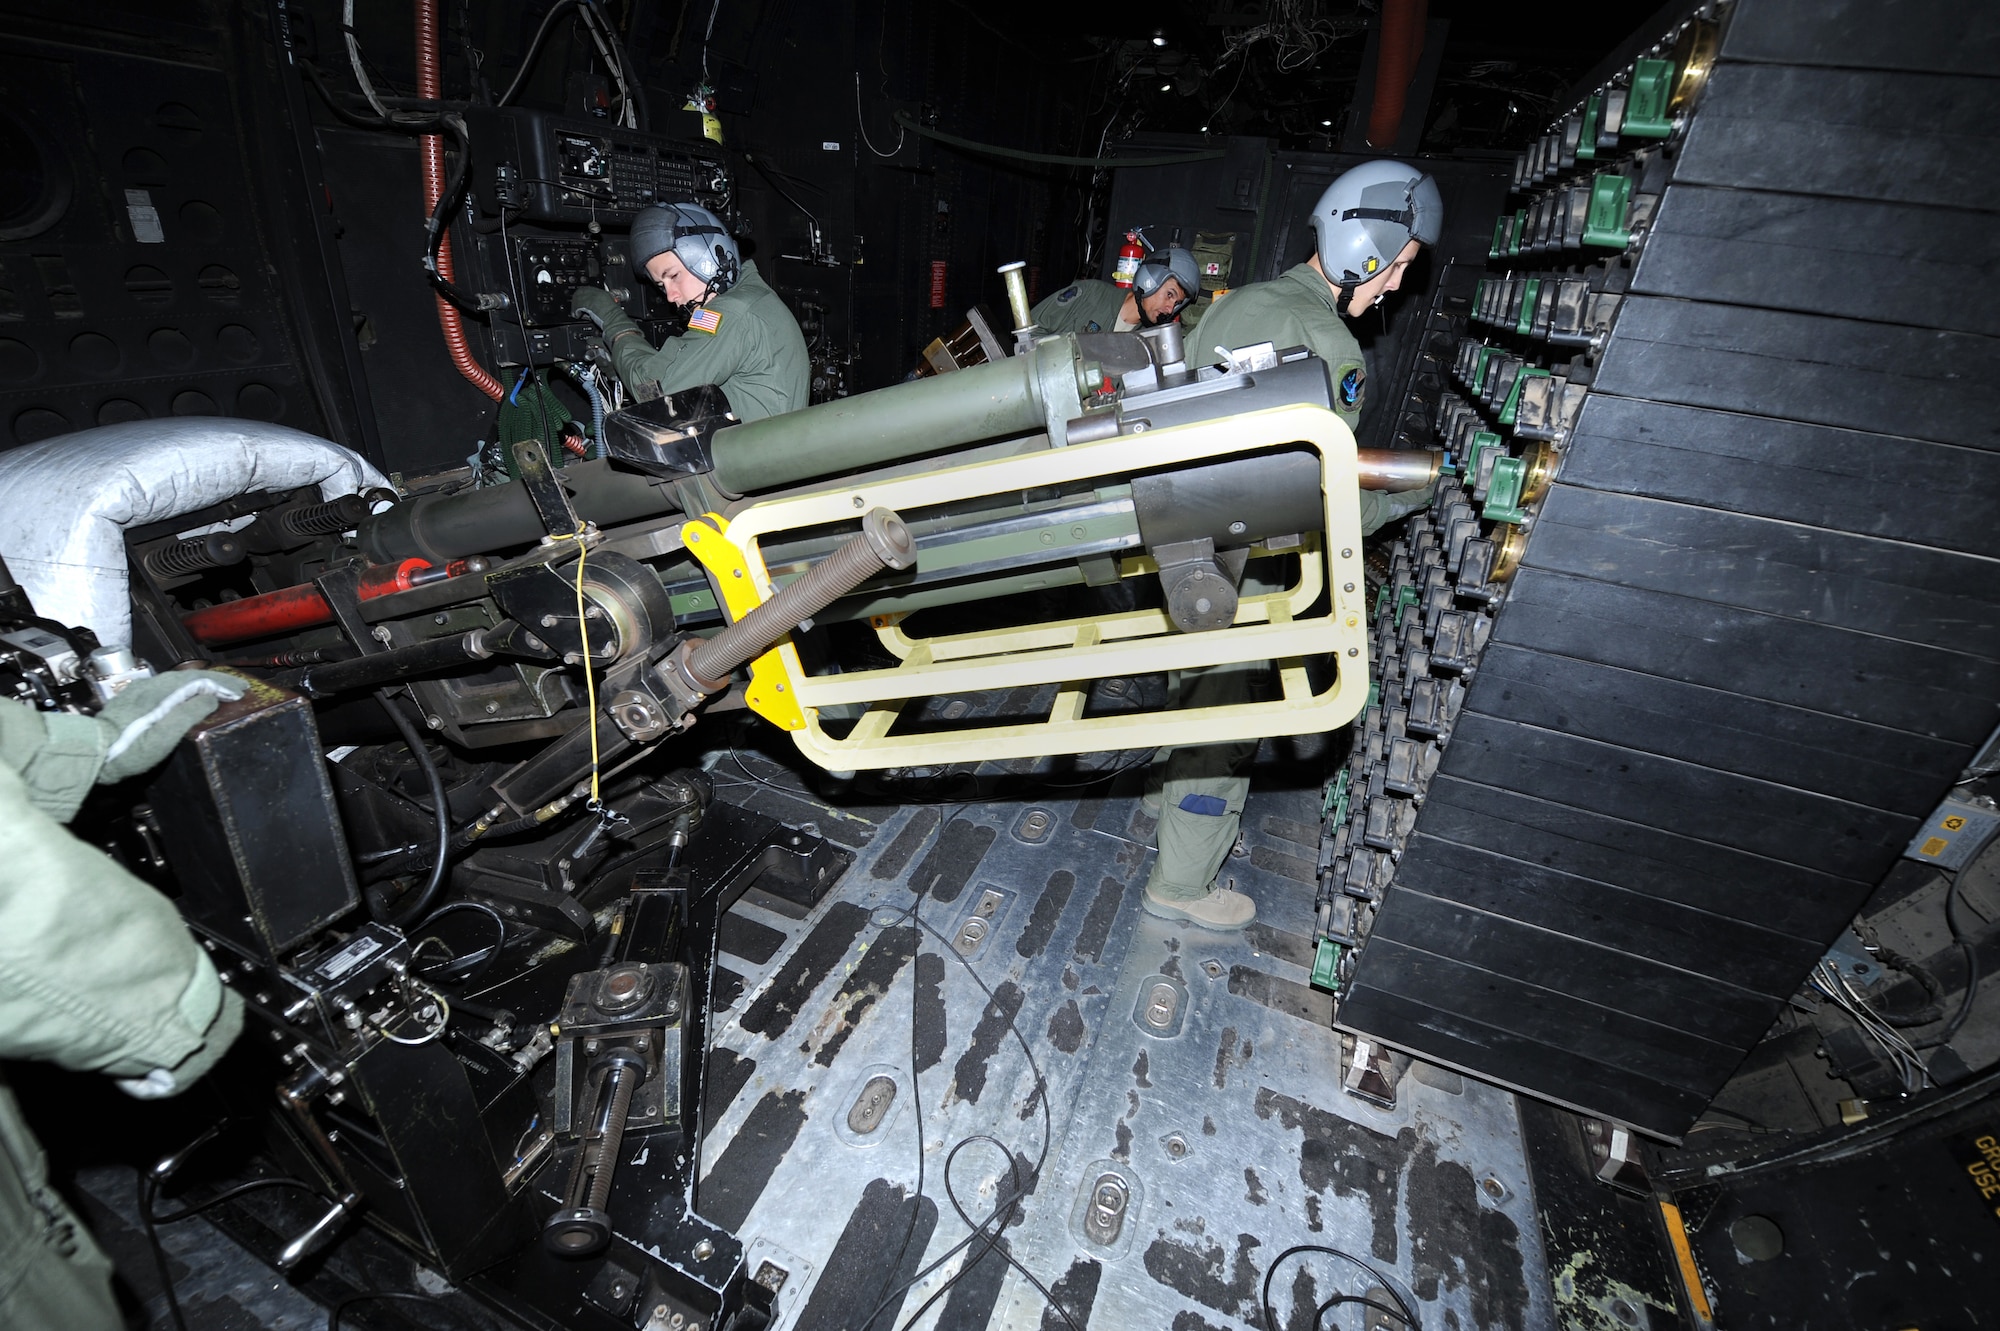 Airman 1st class Dylan Lewark, 16th Special Operations Squadron aerial gunner, unloads a 105mm casing on board an AC-130H Spectre gunship during Operation Dark Night at Melrose Range, N.M., Sept. 22, 2011. This exercise consisted of real life scenarios that could occur in the field. (U.S. Air Force photo by Airman 1st Class Xavier Lockley)